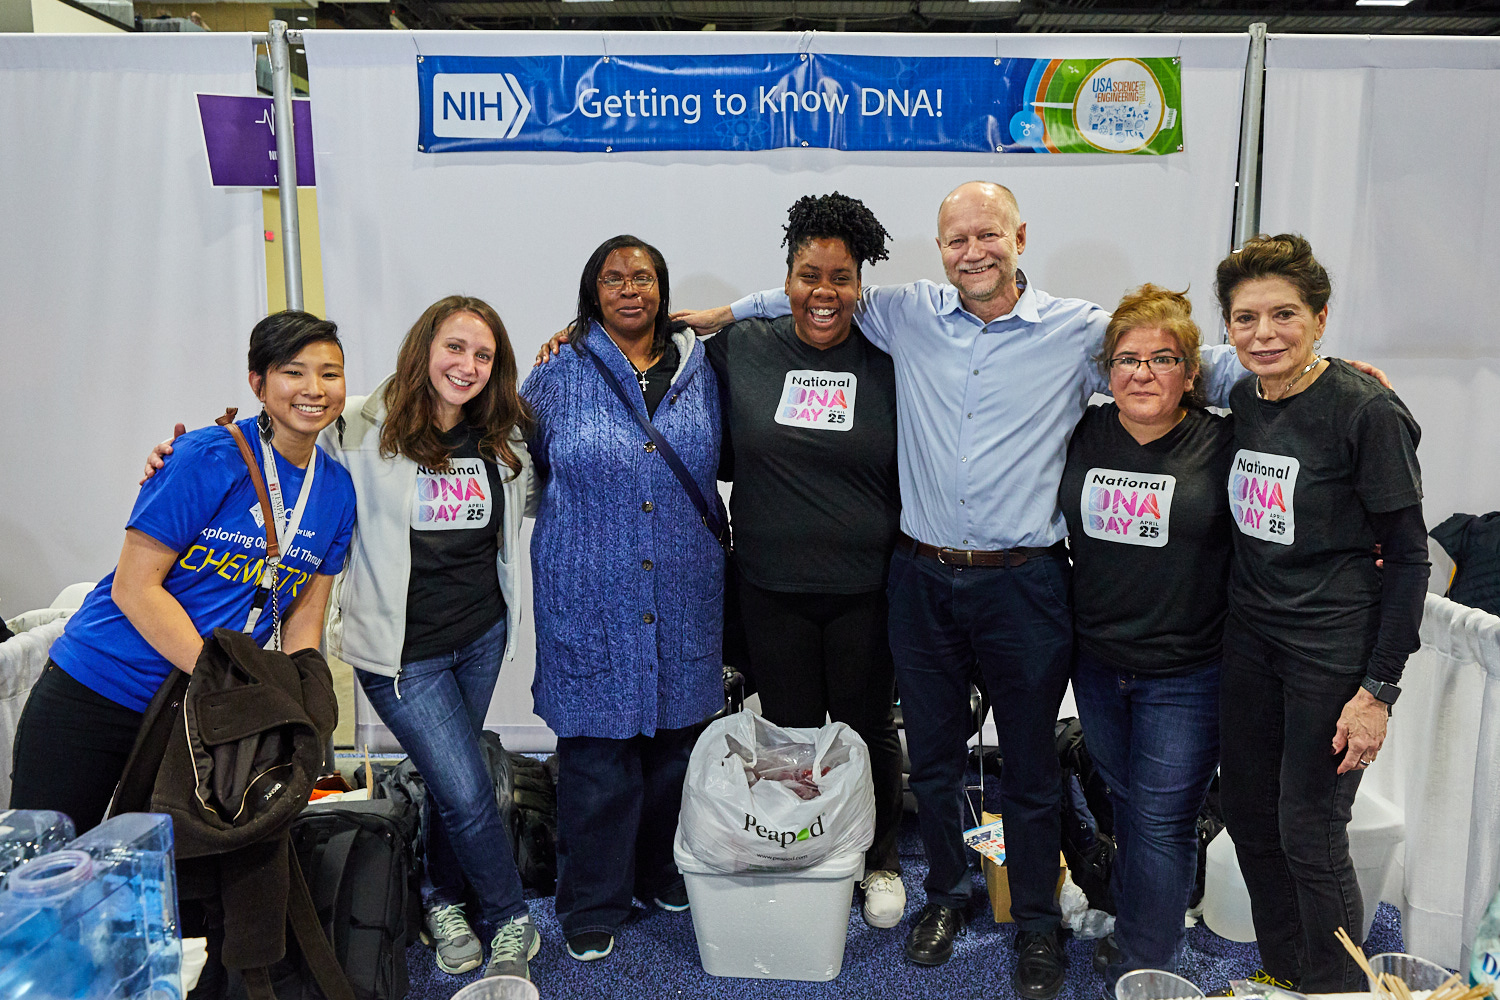 NHGRI Volunteers at the USA Science and Engineering Festival